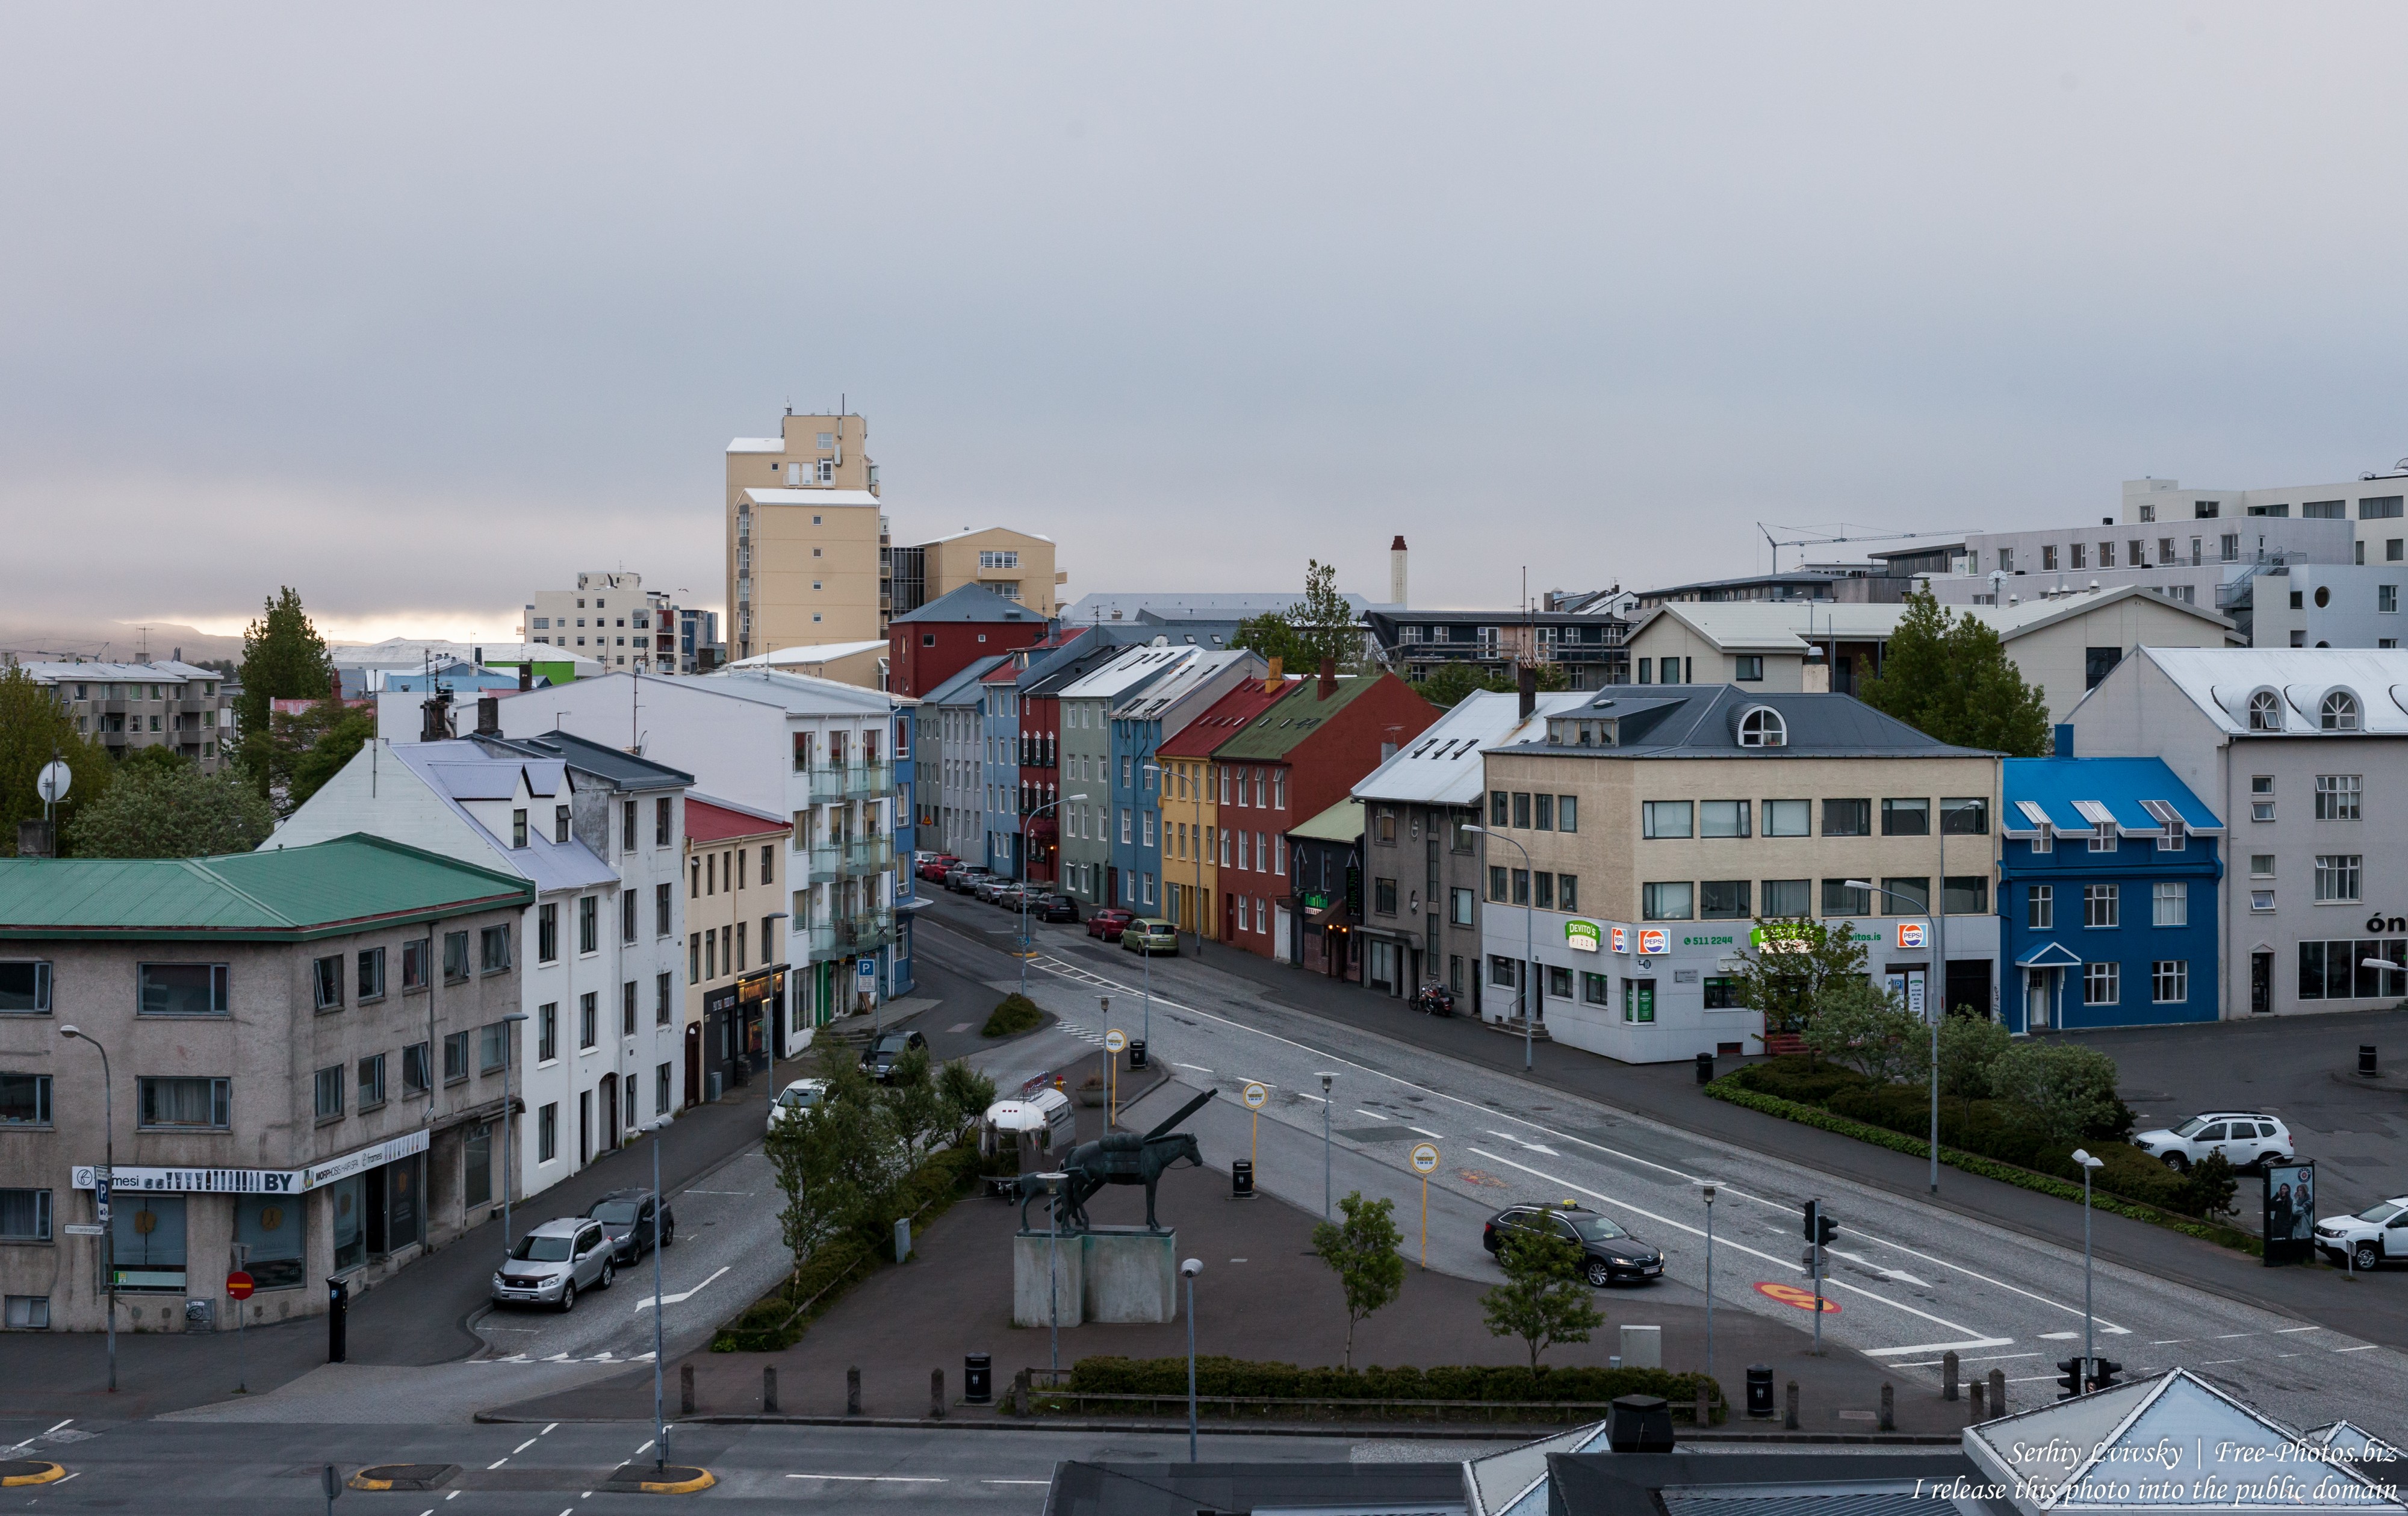 Reykjavik, Iceland, photographed in May 2019 by Serhiy Lvivsky, picture 4